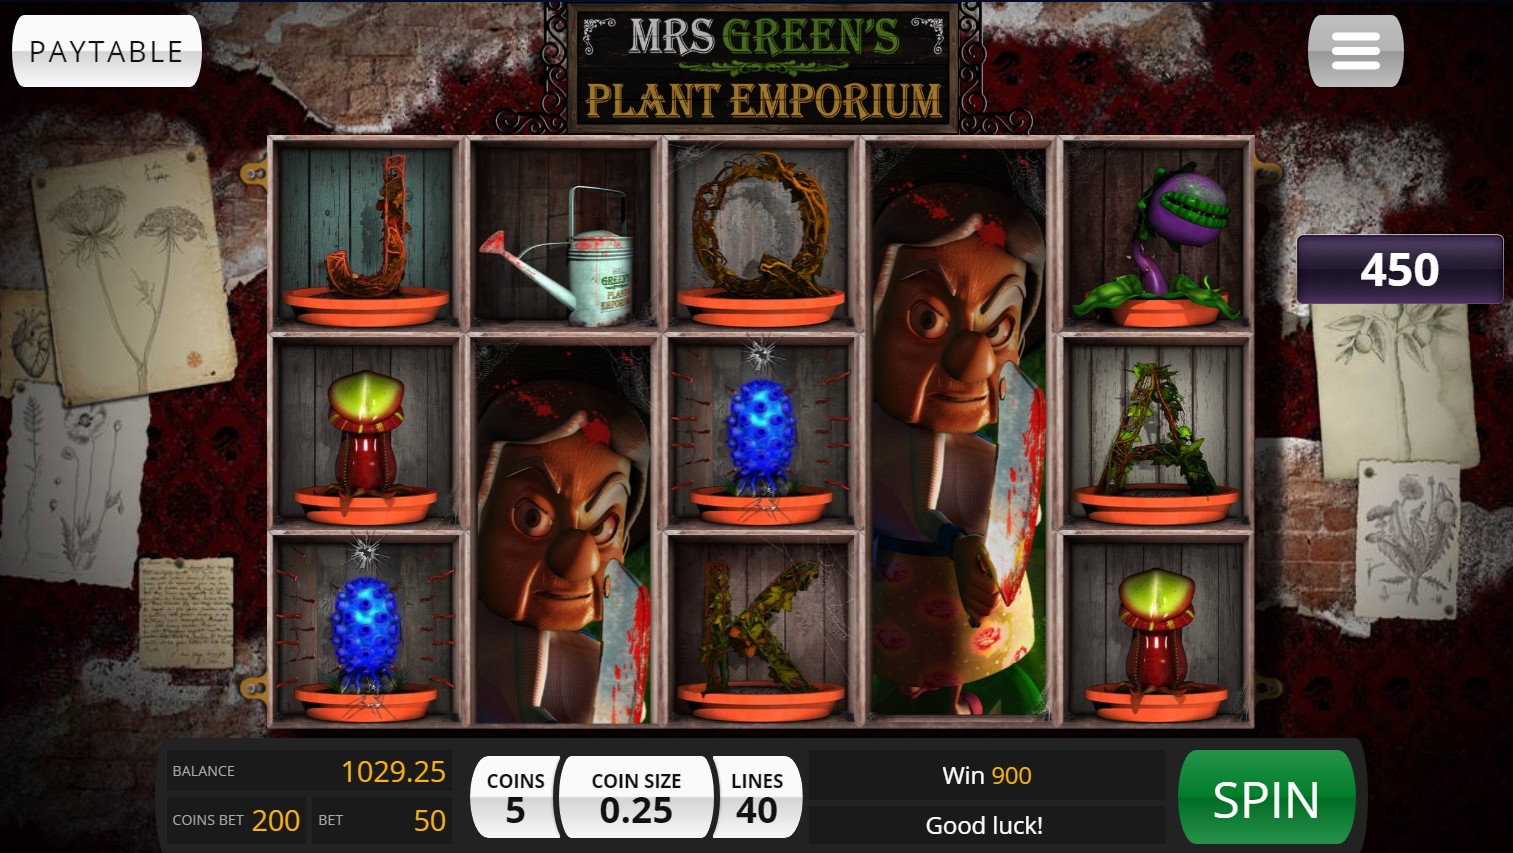 Mrs. Green’s Plant Emporium (Mrs. Green’s Plant Emporium) from category Slots